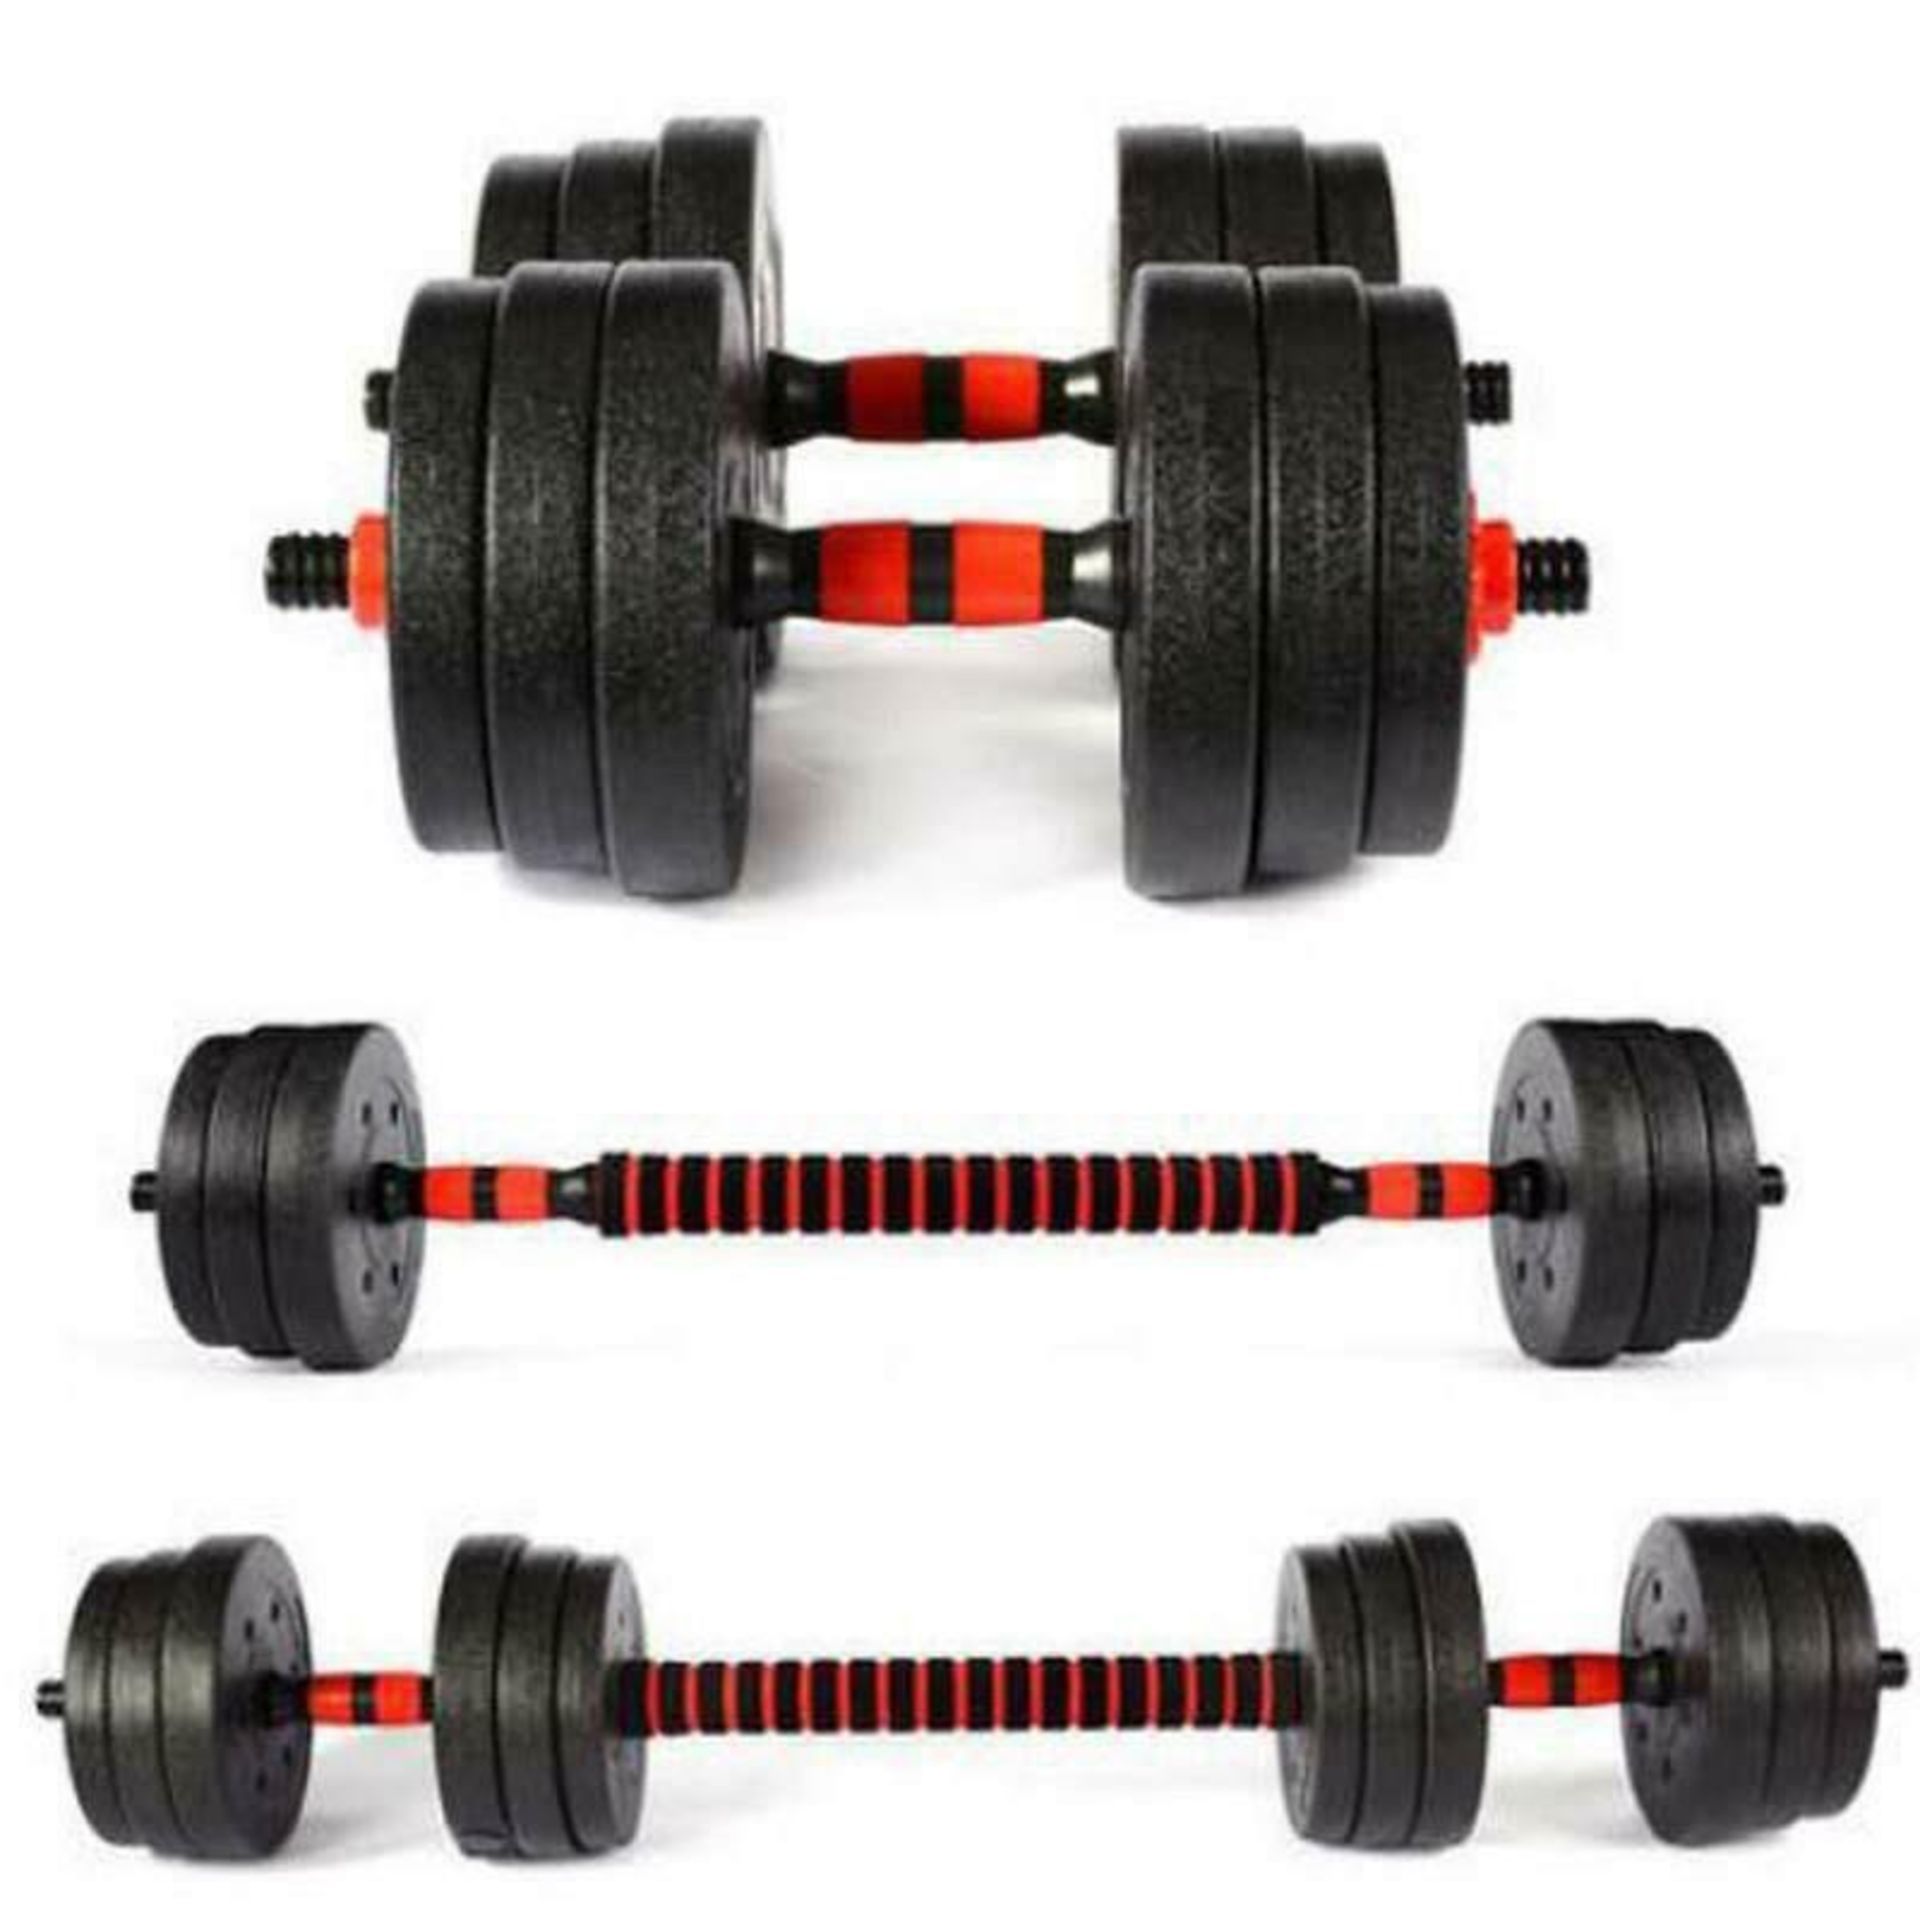 2 X BRAND NEW 20KG BARBELL DUMBBELL BODY BUILDING SETS R13-7